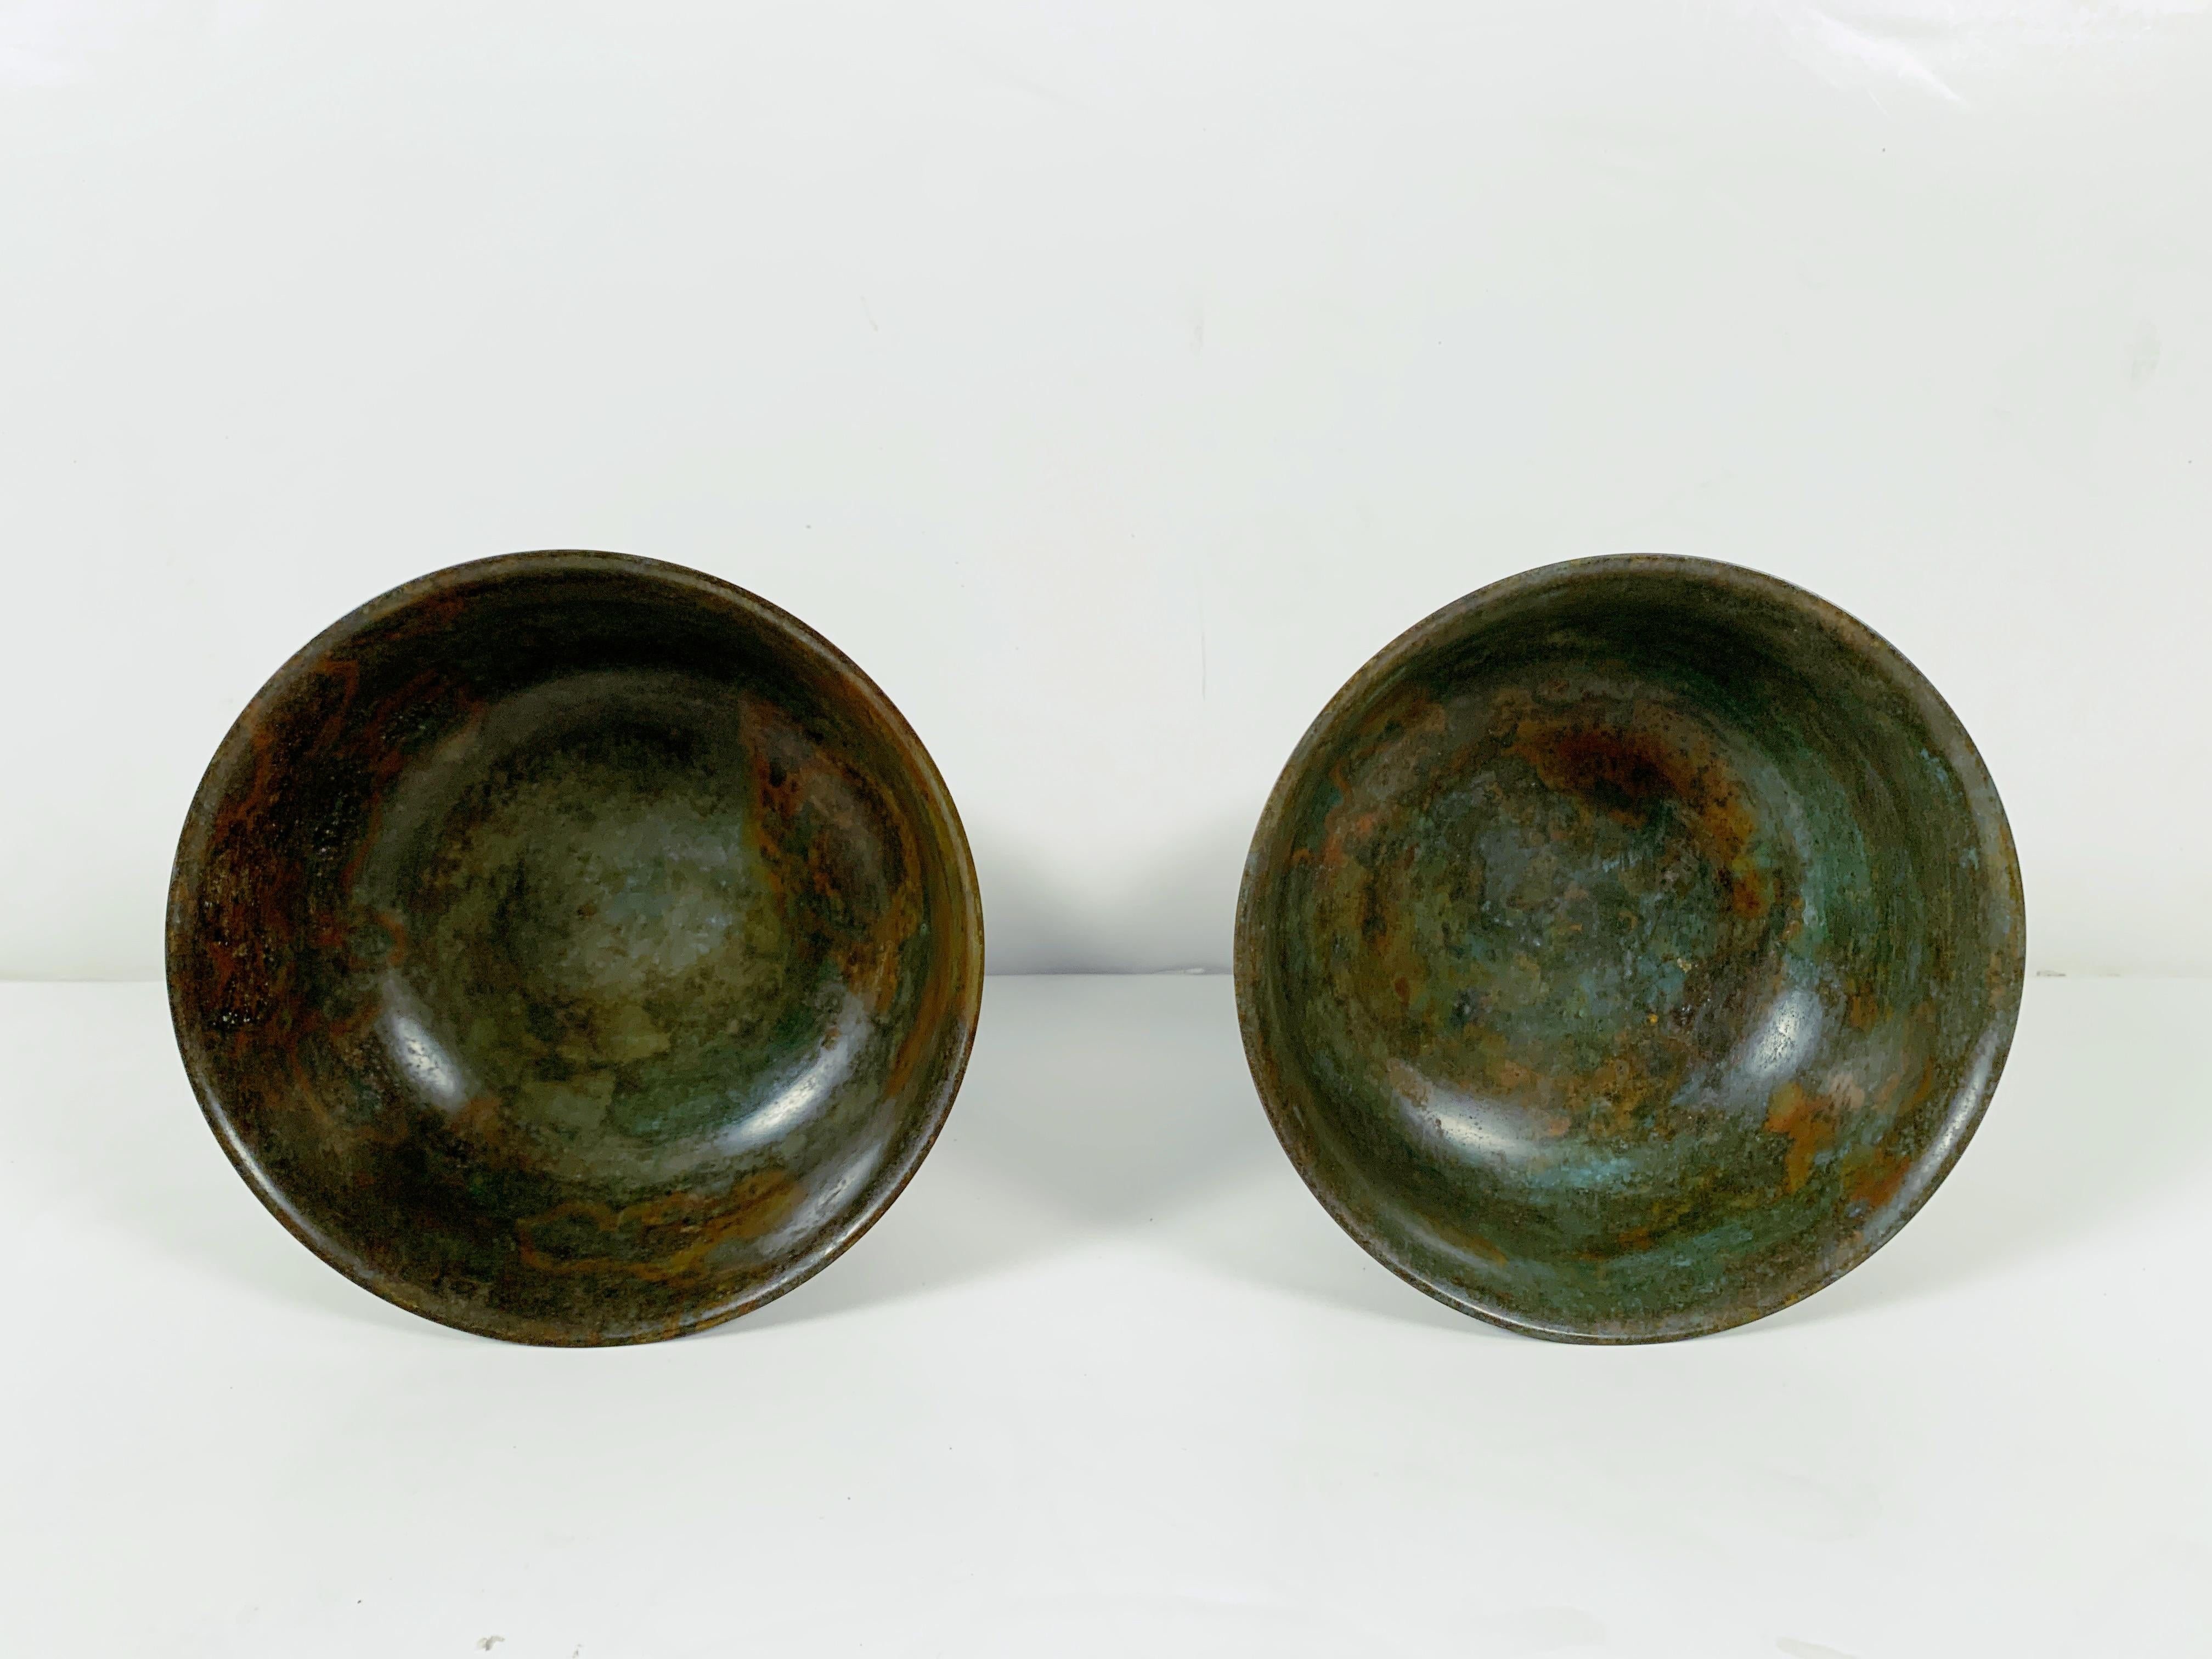 Pair of Korean Goryeo Dynasty Bronze Pedestal Bowls, 13th-15th Century, Korea In Good Condition For Sale In Austin, TX